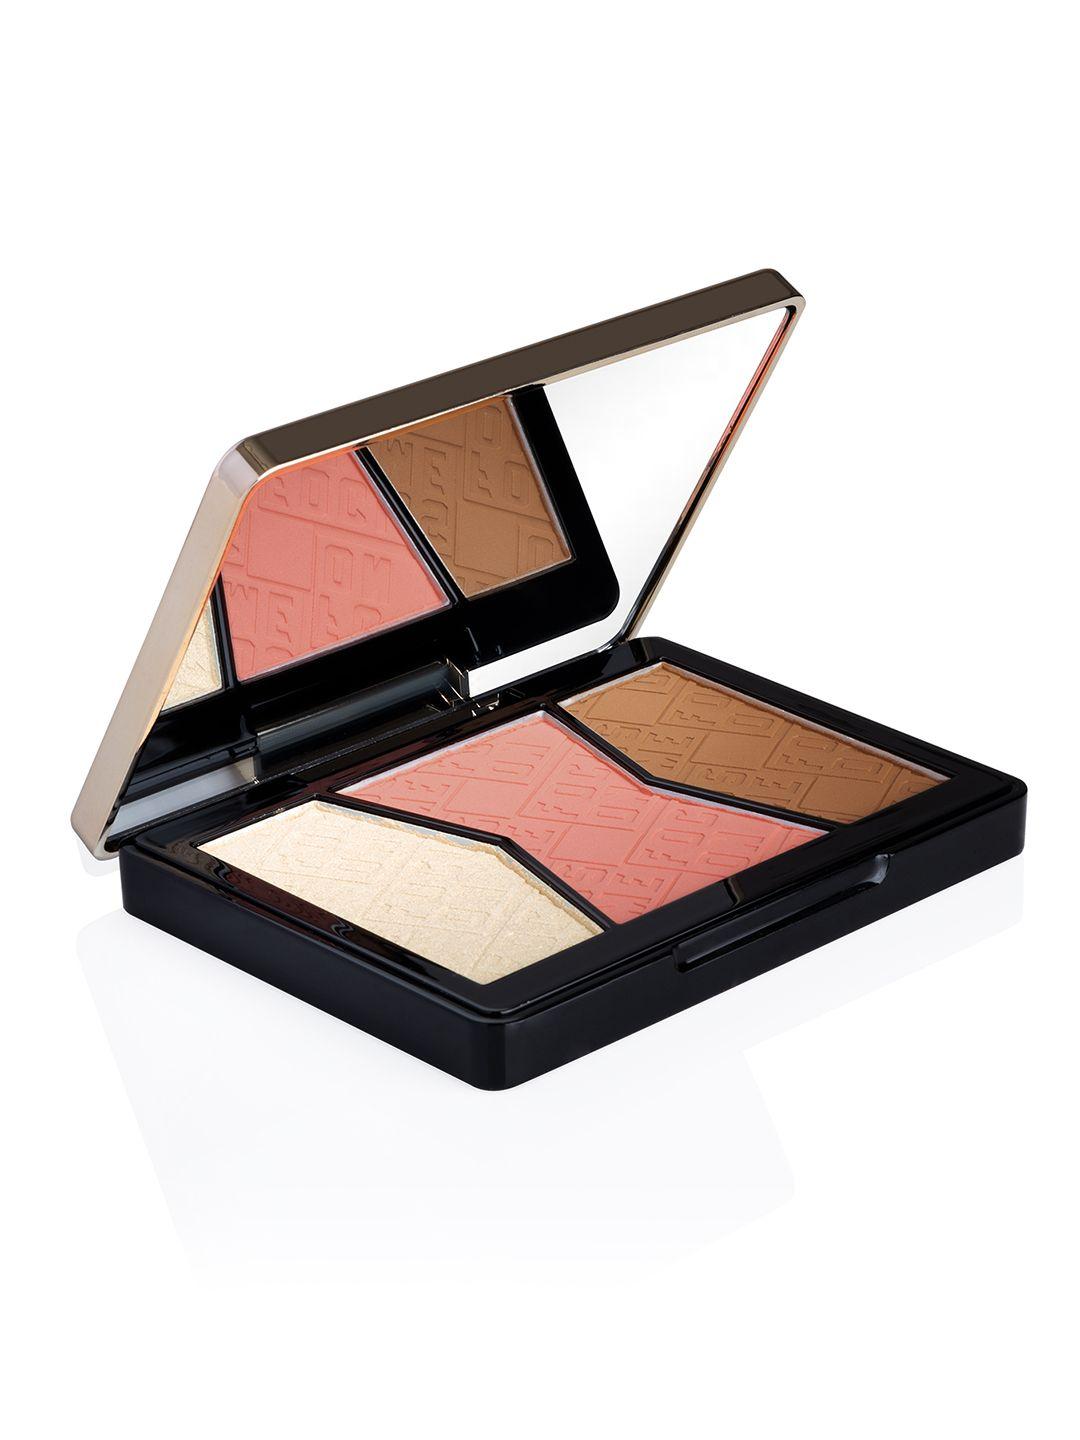 pac focus on me high-pigmented 3-in-1 blush & highlighter palette - medium